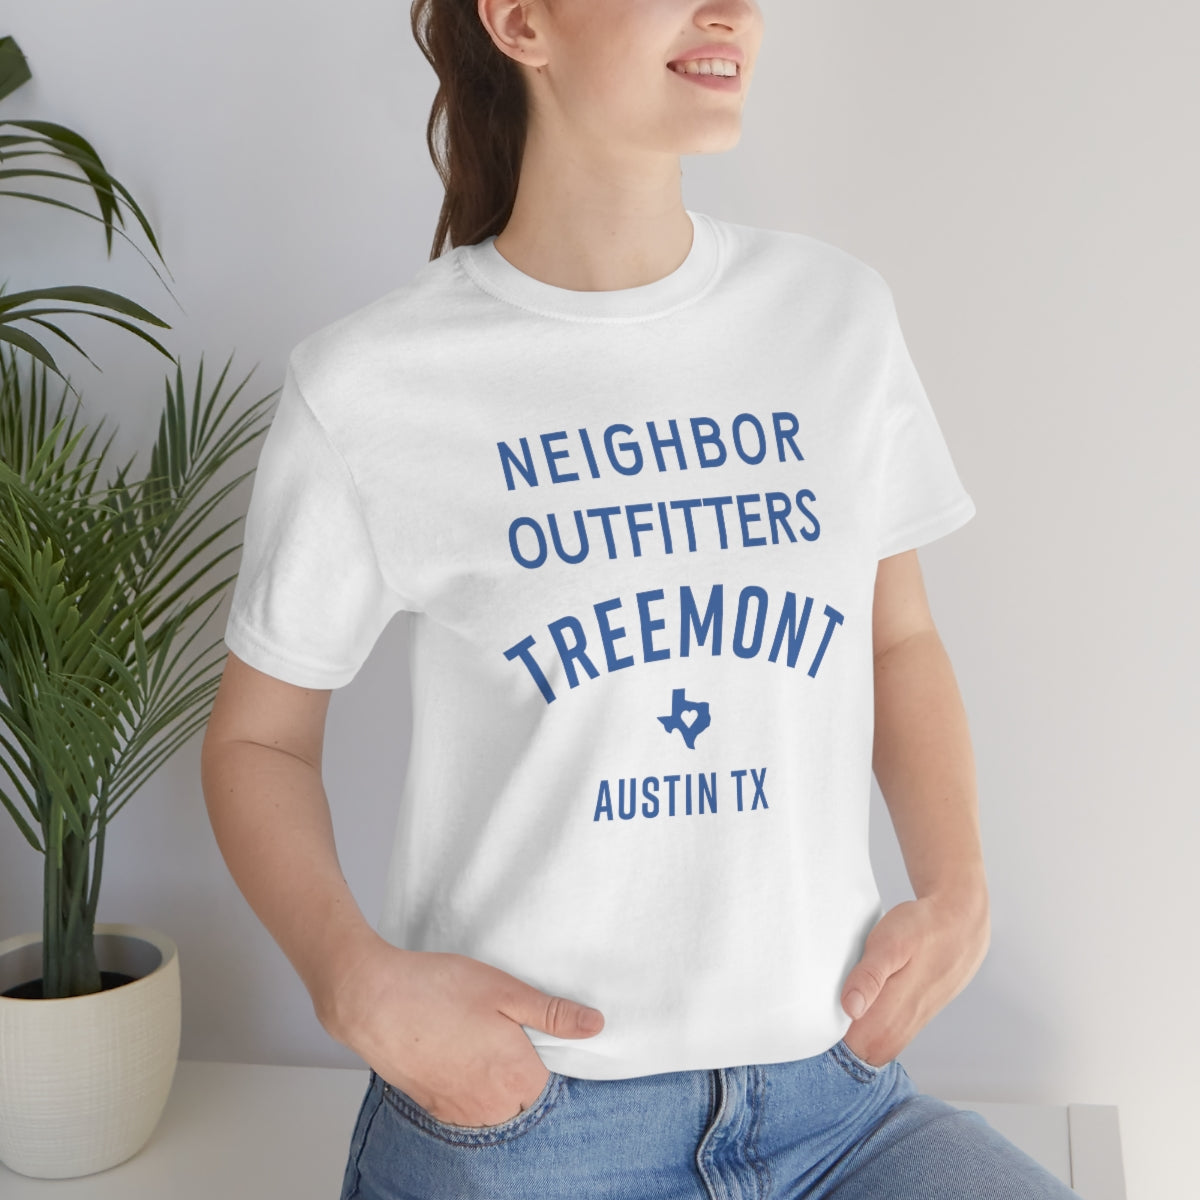 Treemont T-Shirt: Neighbor Outfitters Brand